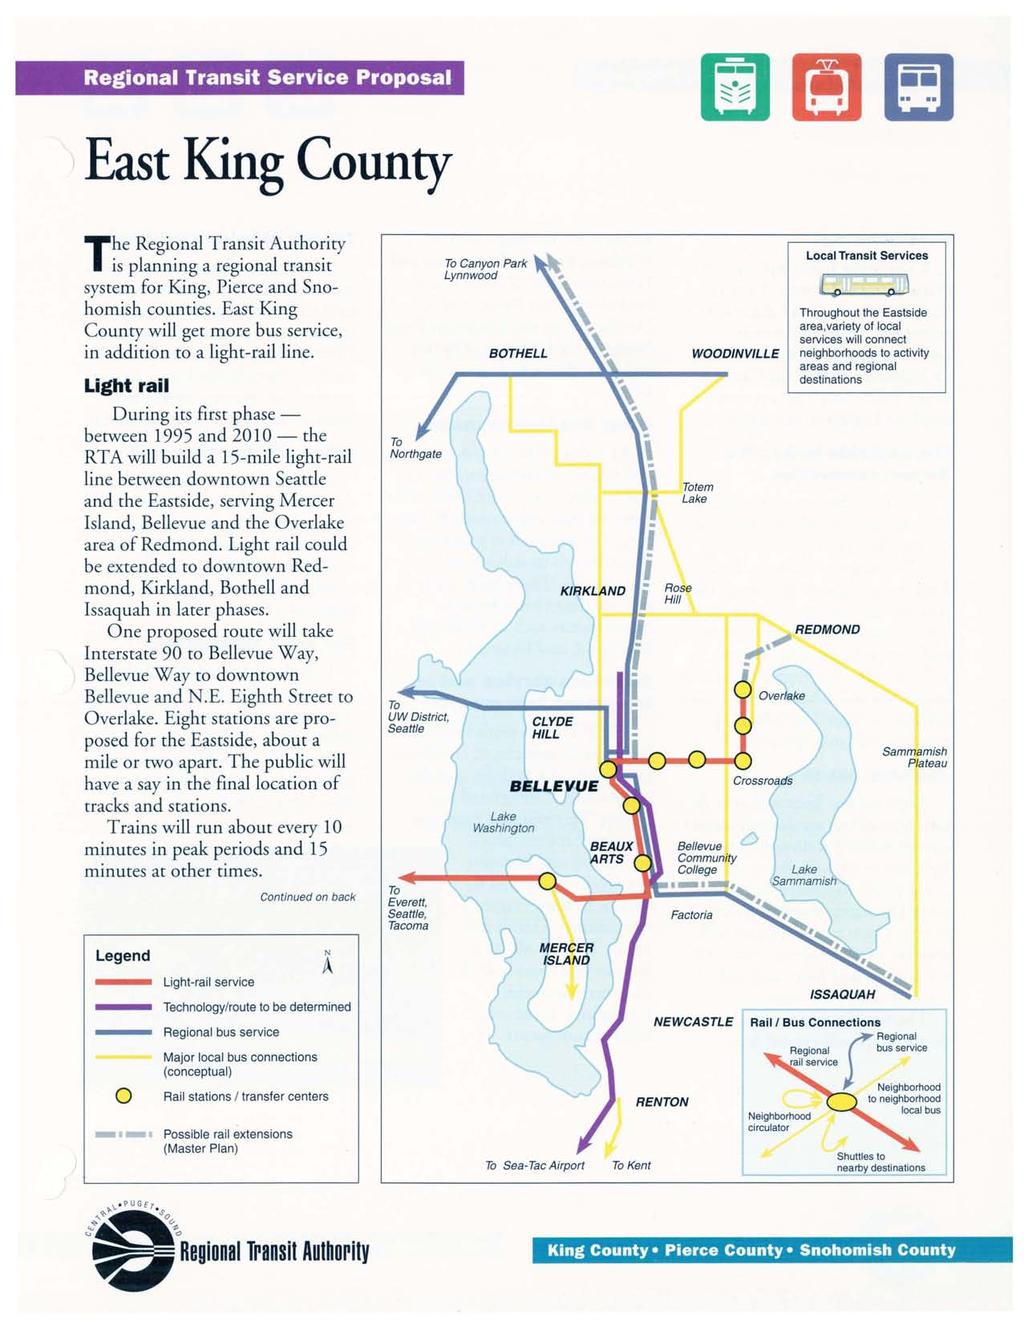 Regional Transit Service Proposal East King County - ~.~ '-".,,- [!] - f!i ~ The Regional Transit Authority is planning a regional transit system for King, Pierce and Snohomish counties.